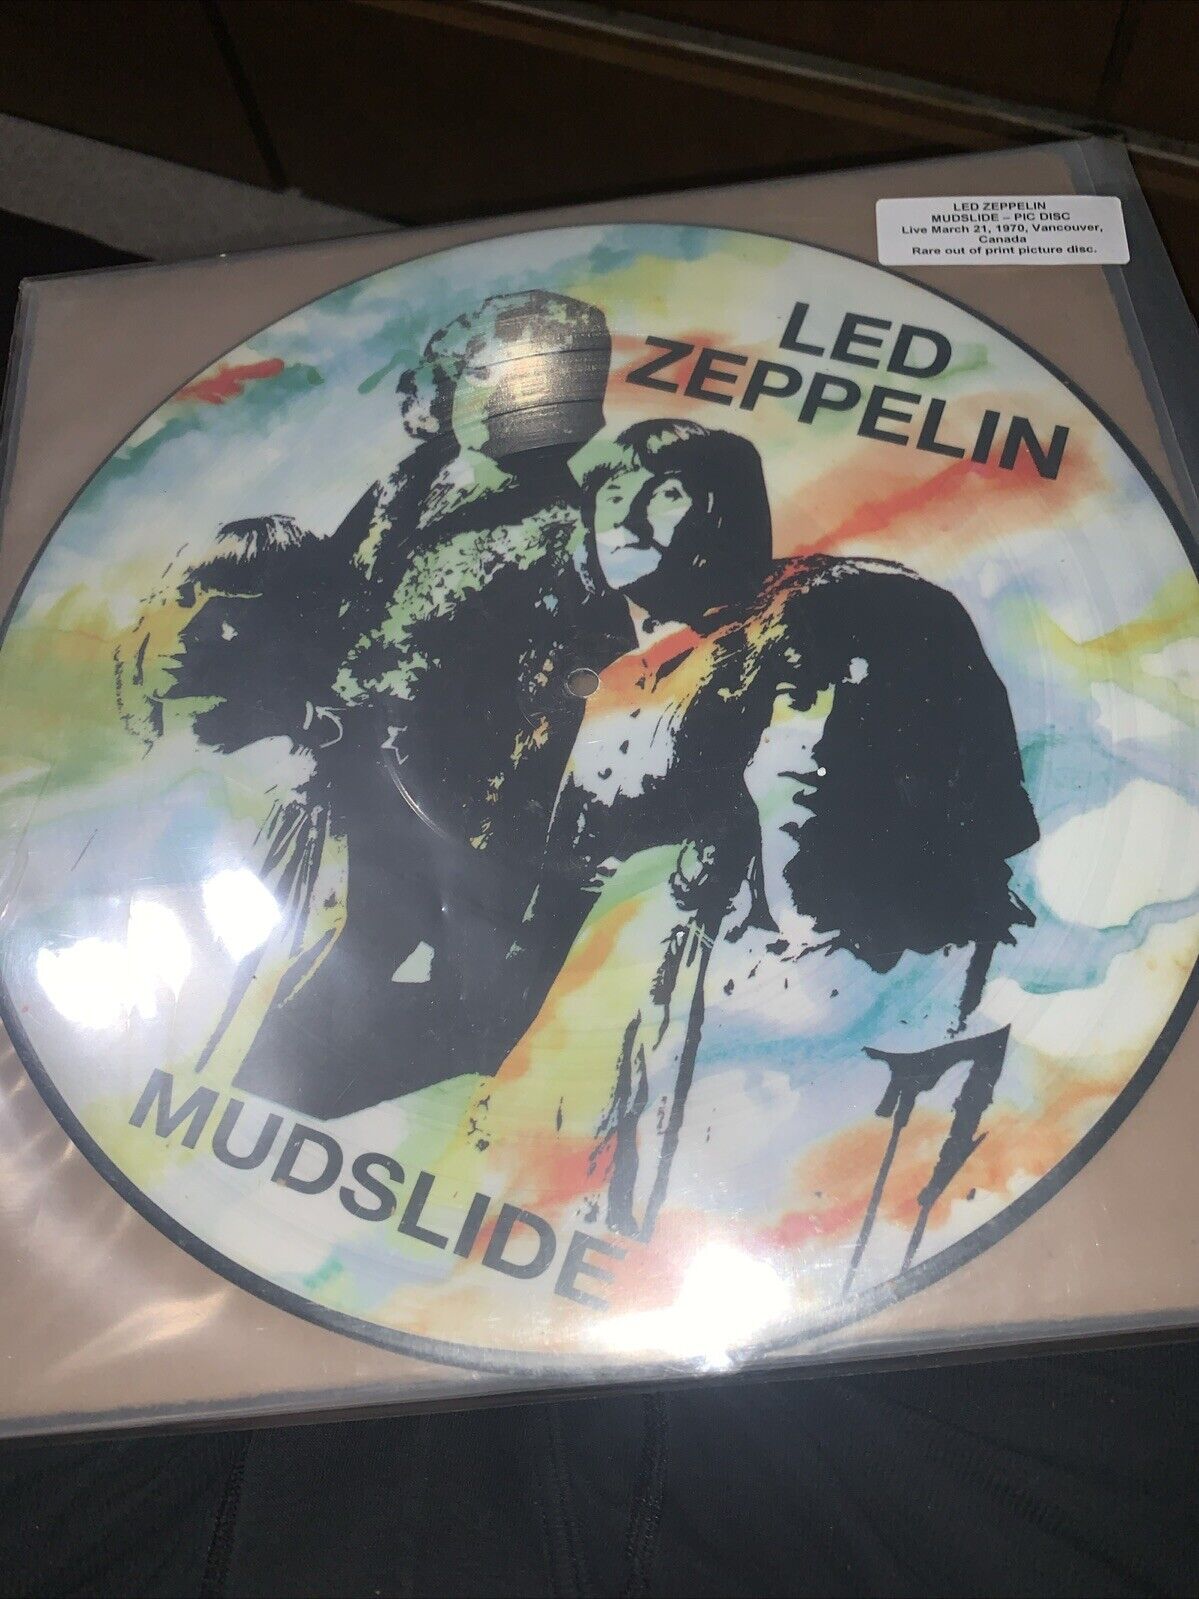 Led Zeppelin Mudslide – Pic Disc Live March 21, 1970 Vancouver Rare out of print